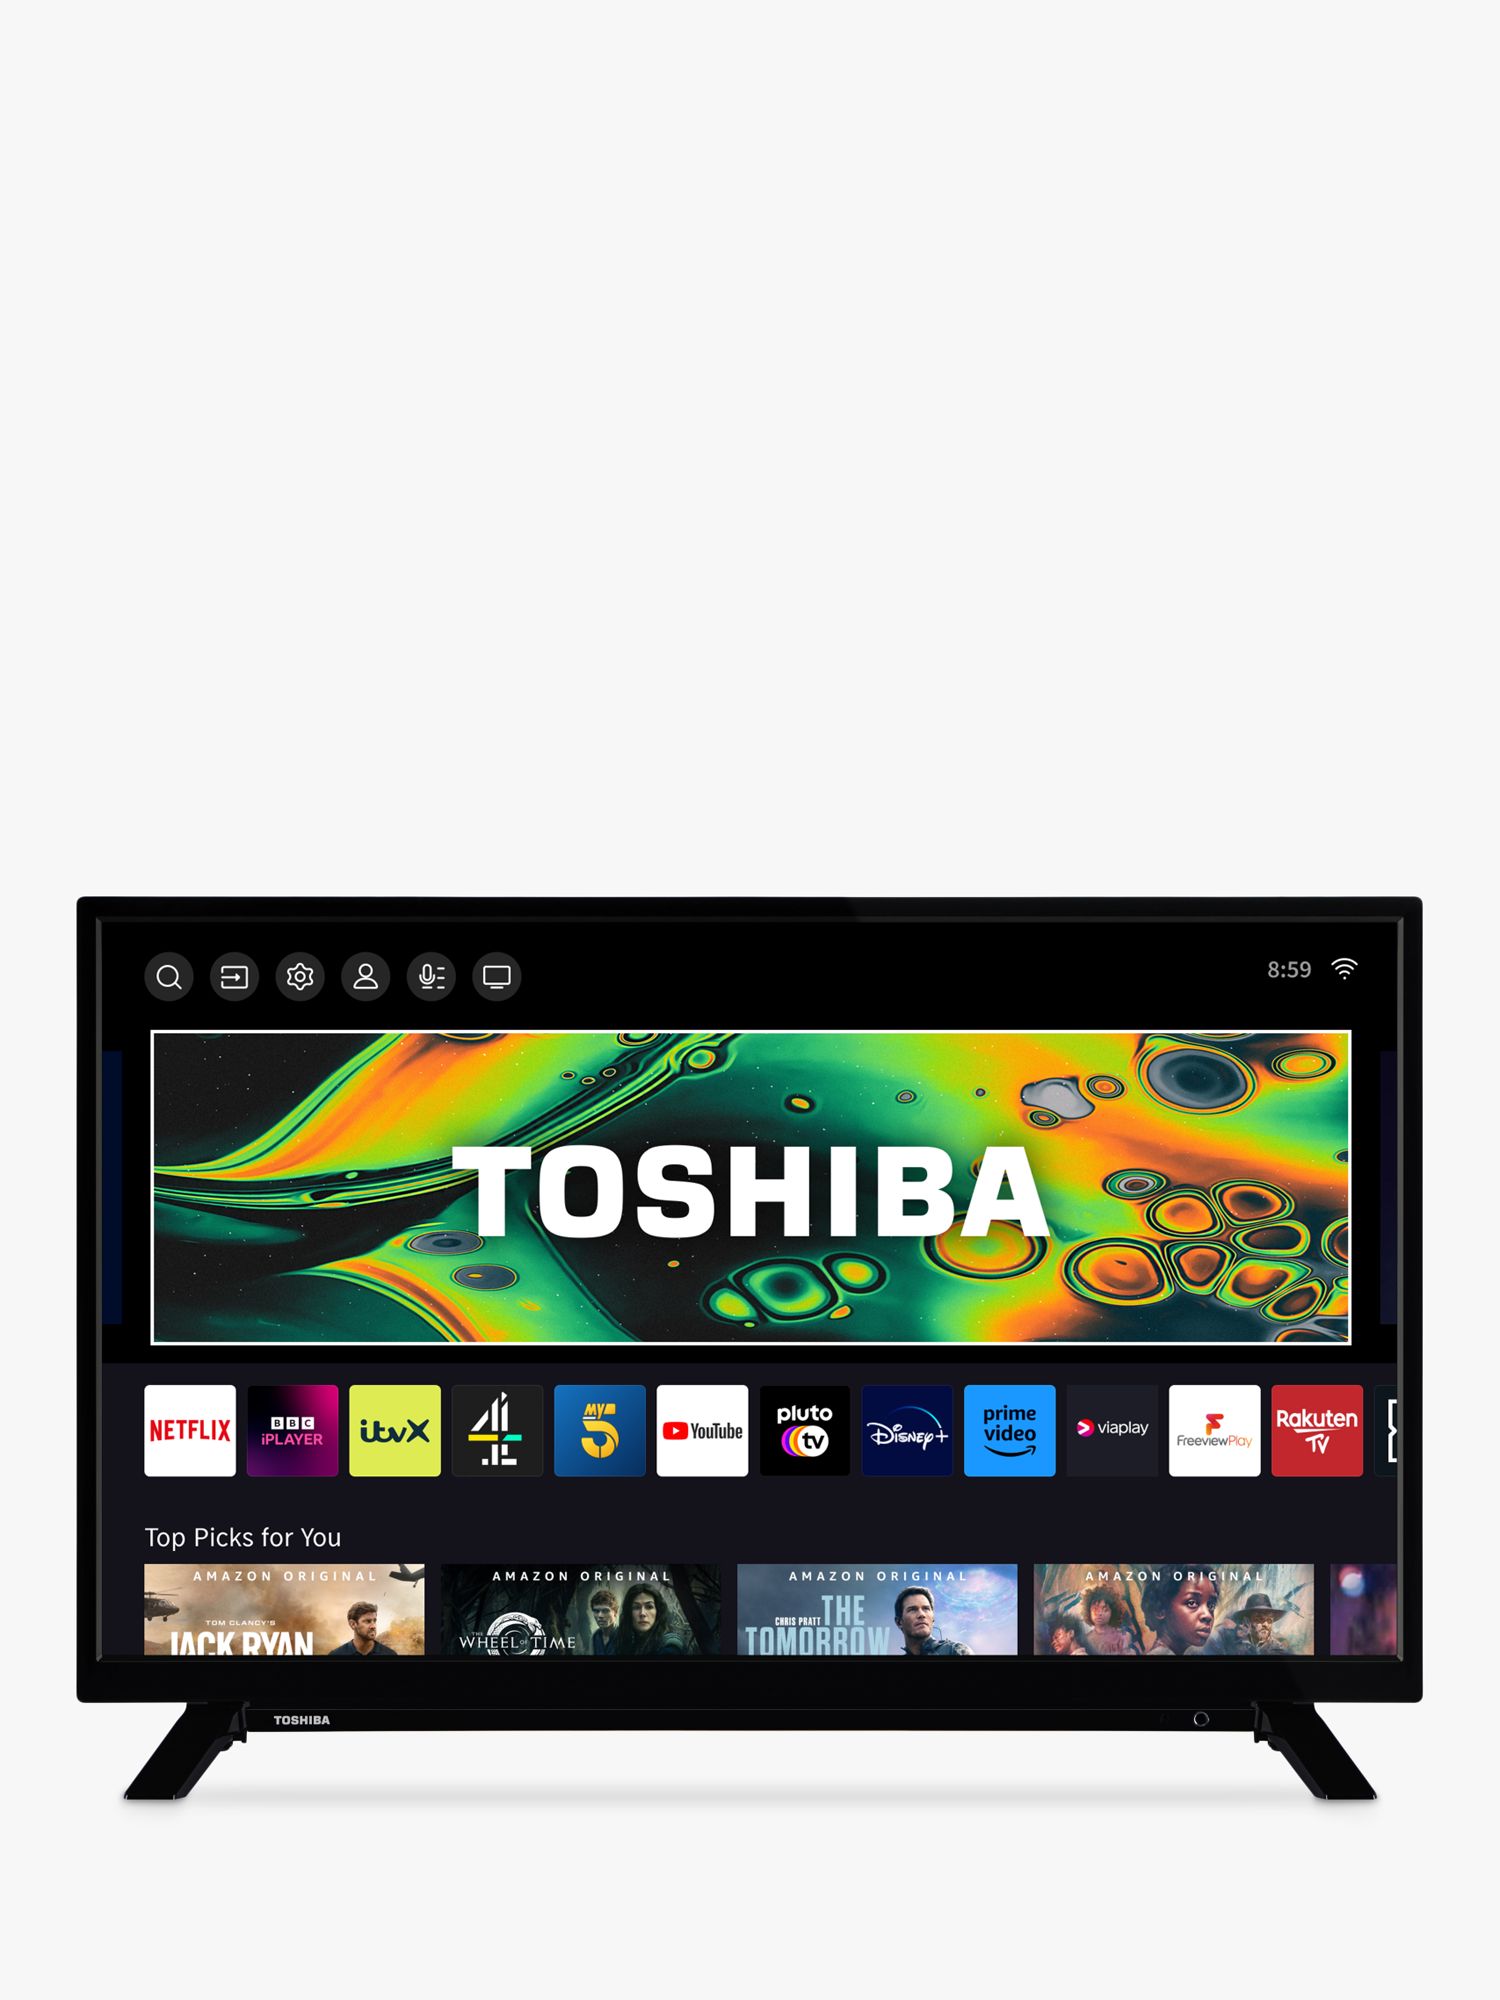 Toshiba 32WV2353DB (2023) LED HDR HD Ready 720p Smart TV, 32 inch with Freeview Play, Black